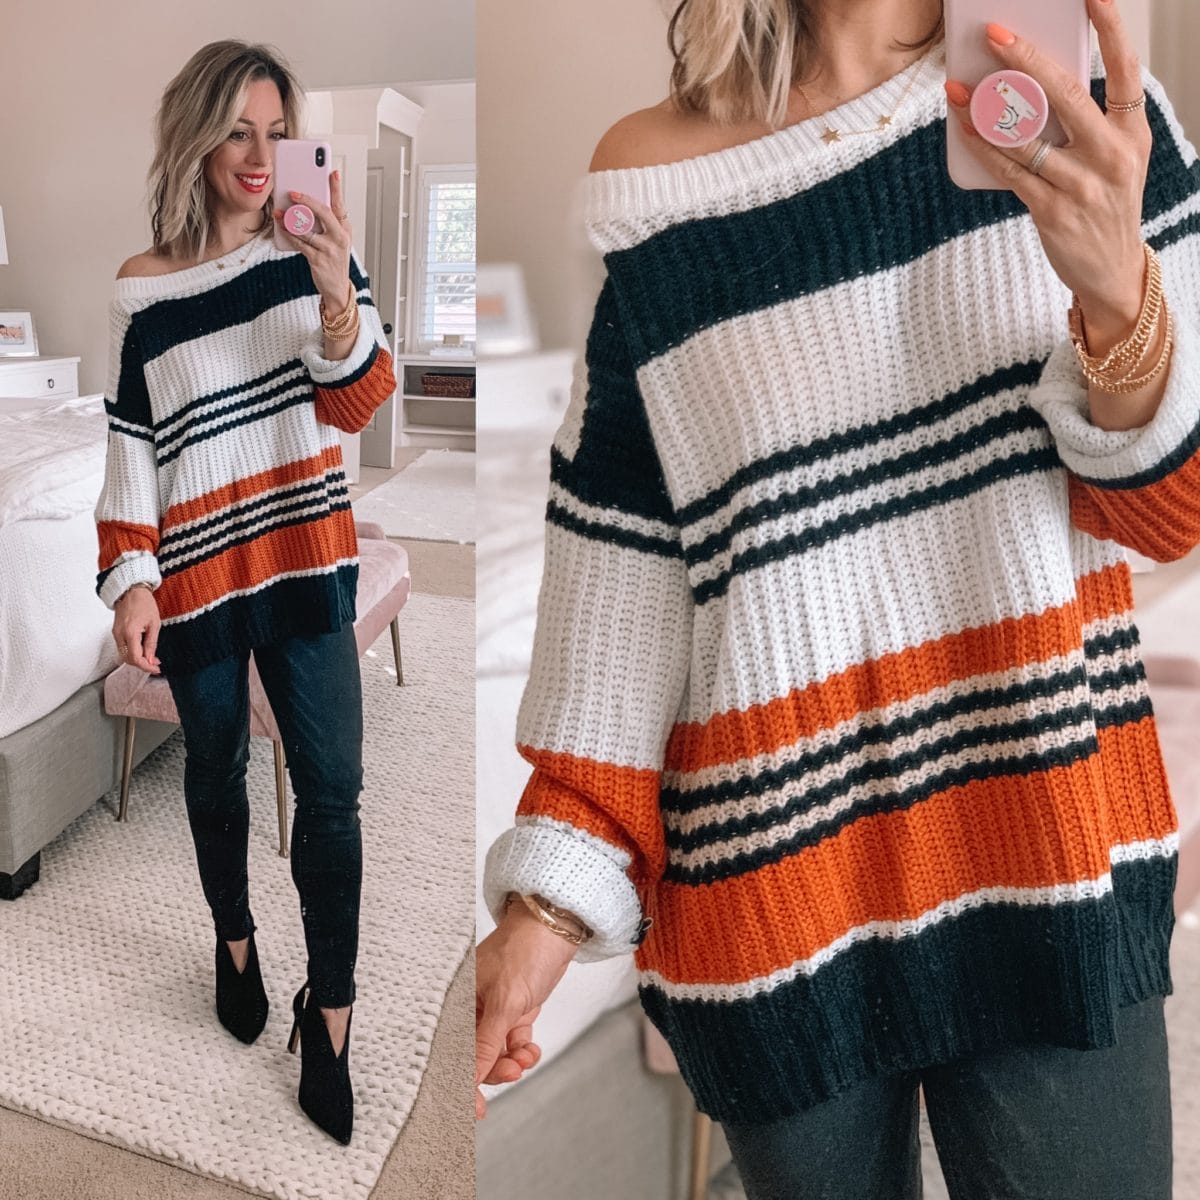 Striped Sweater off the shoulder, Black Jeans, Black Booties